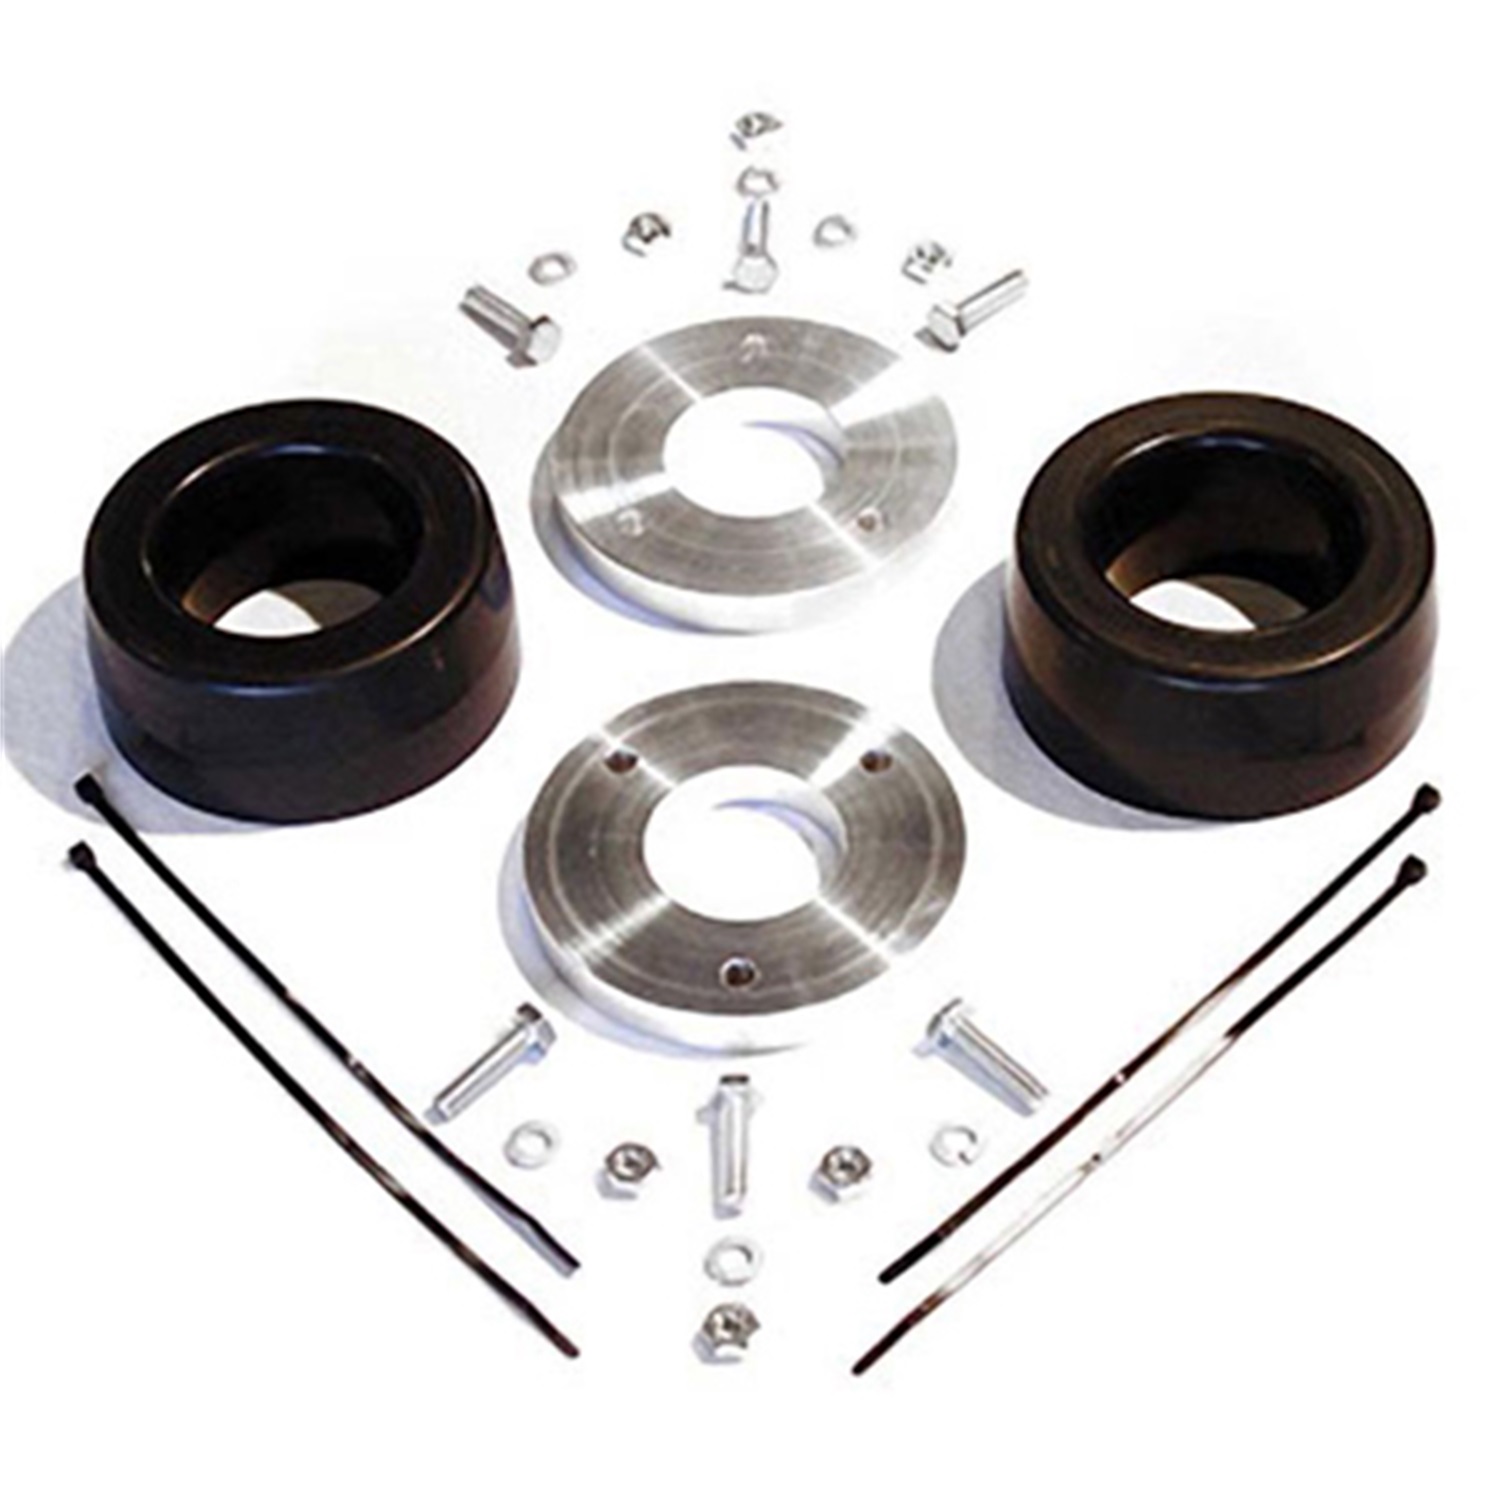 Performance Accessories Performance Accessories NL221PA Coil Spring Leveling System Fits 05-14 Frontier